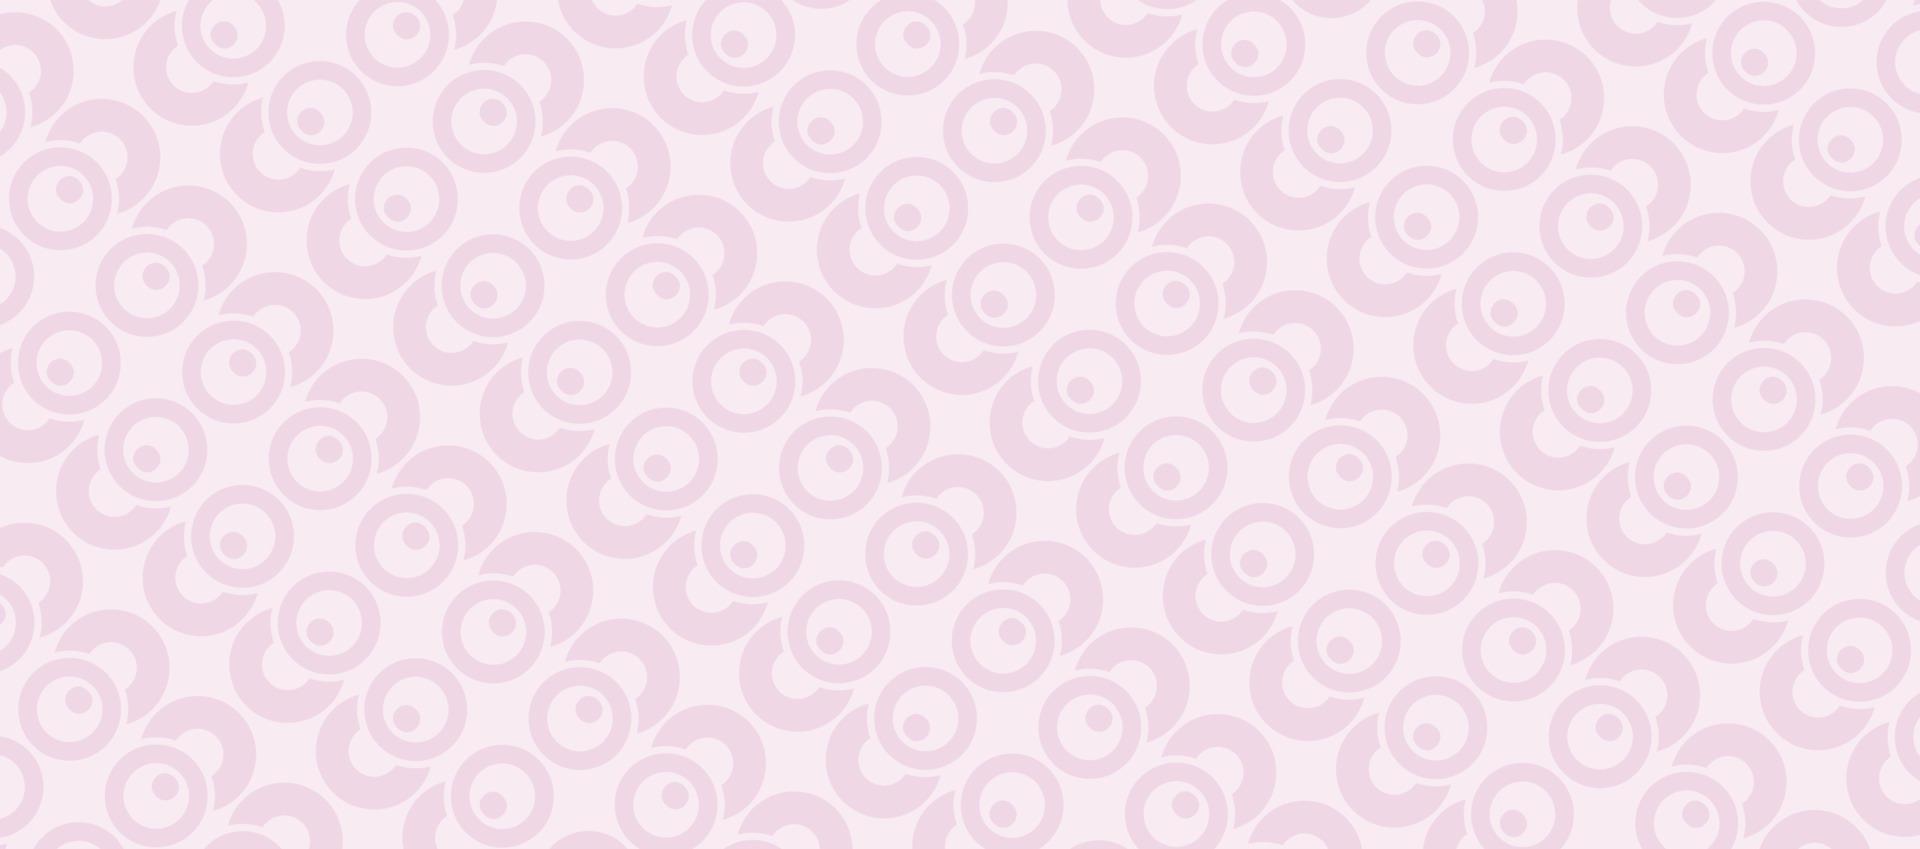 Vector geometric circle texture. Pink background.